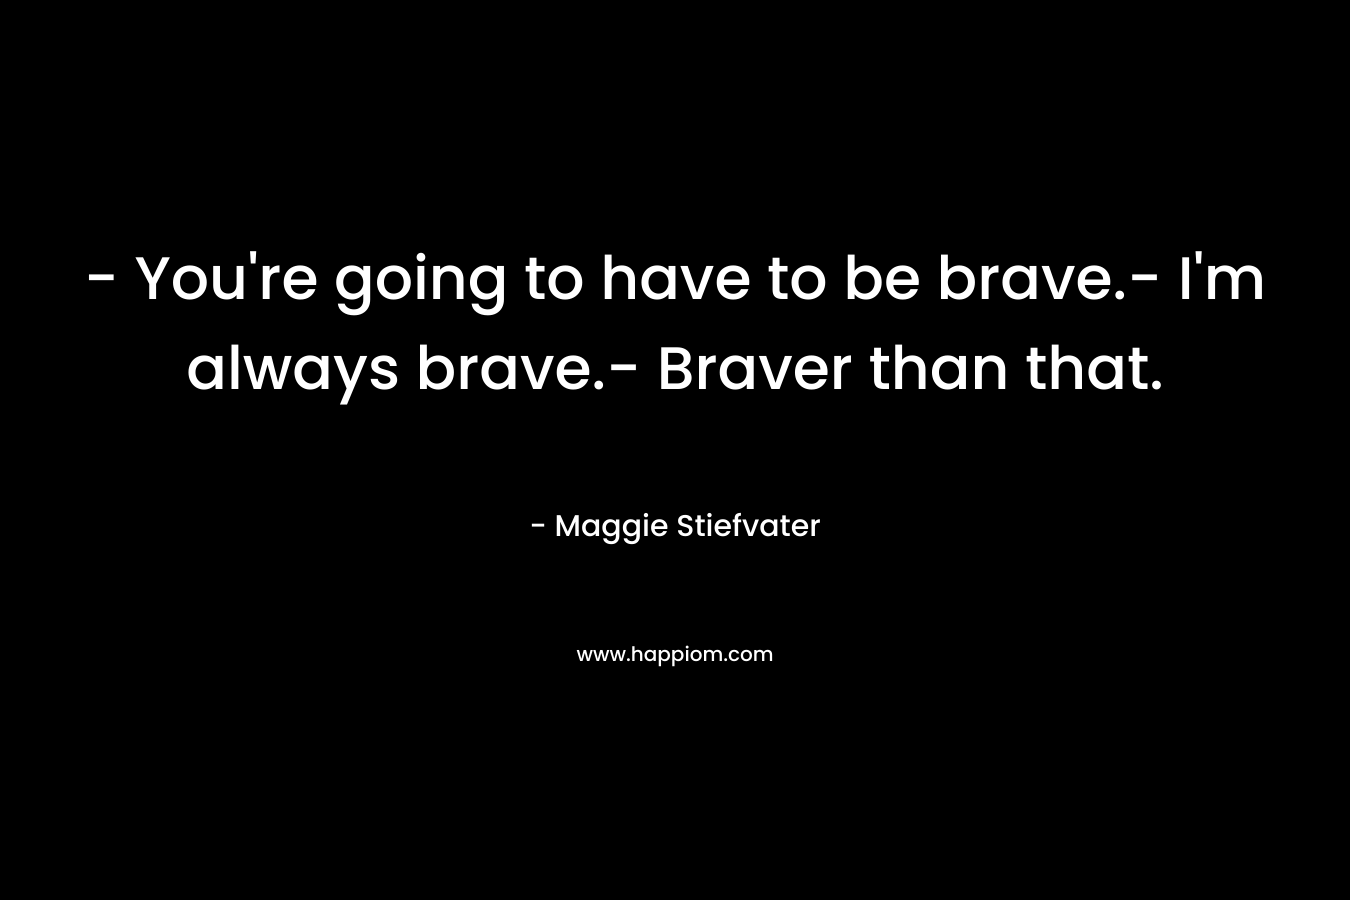 - You're going to have to be brave.- I'm always brave.- Braver than that.